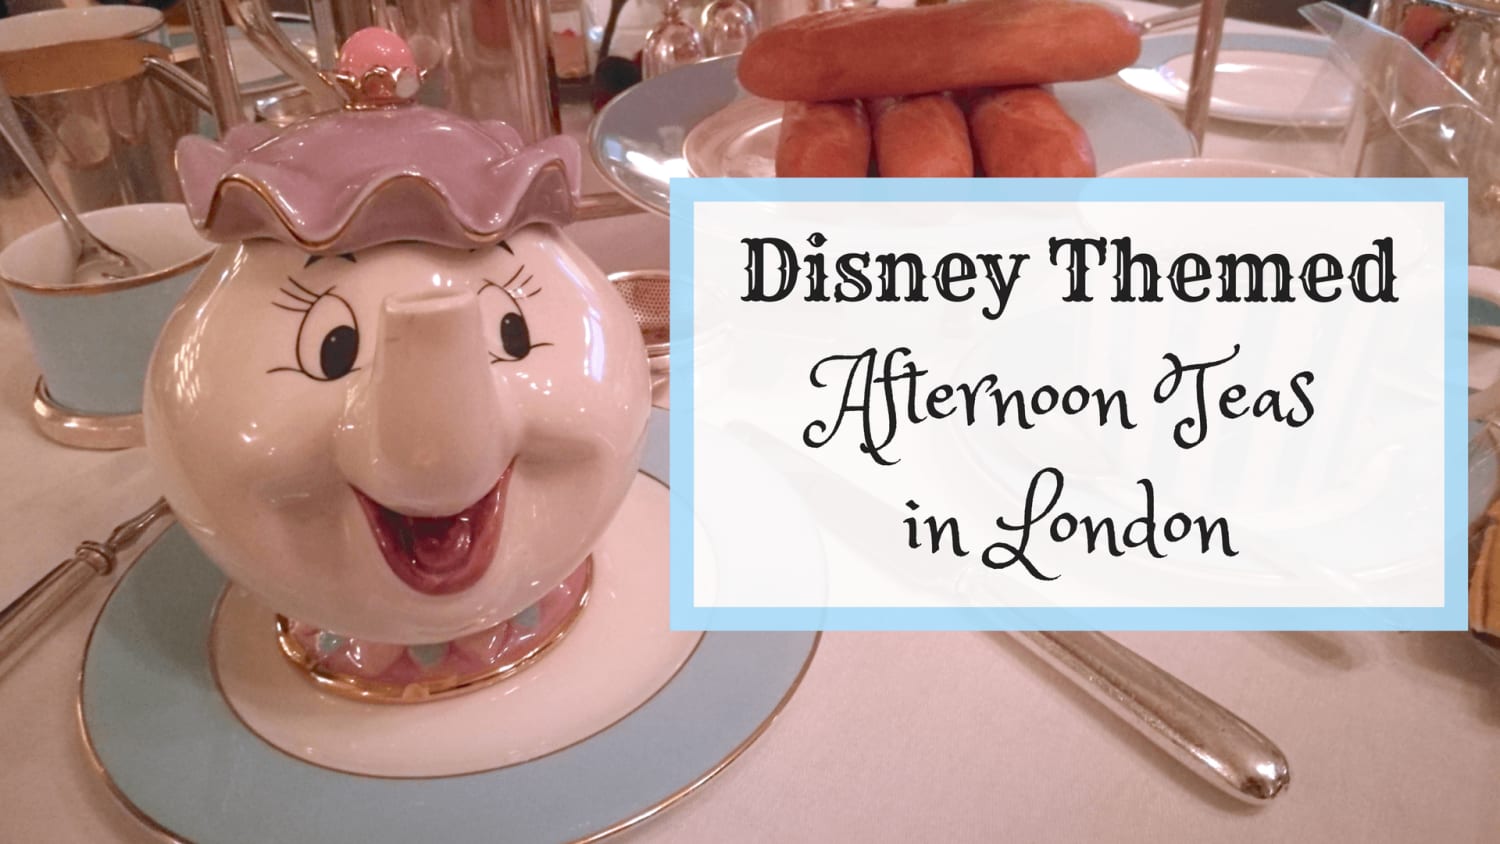 Disney Themed Afternoon Teas in London